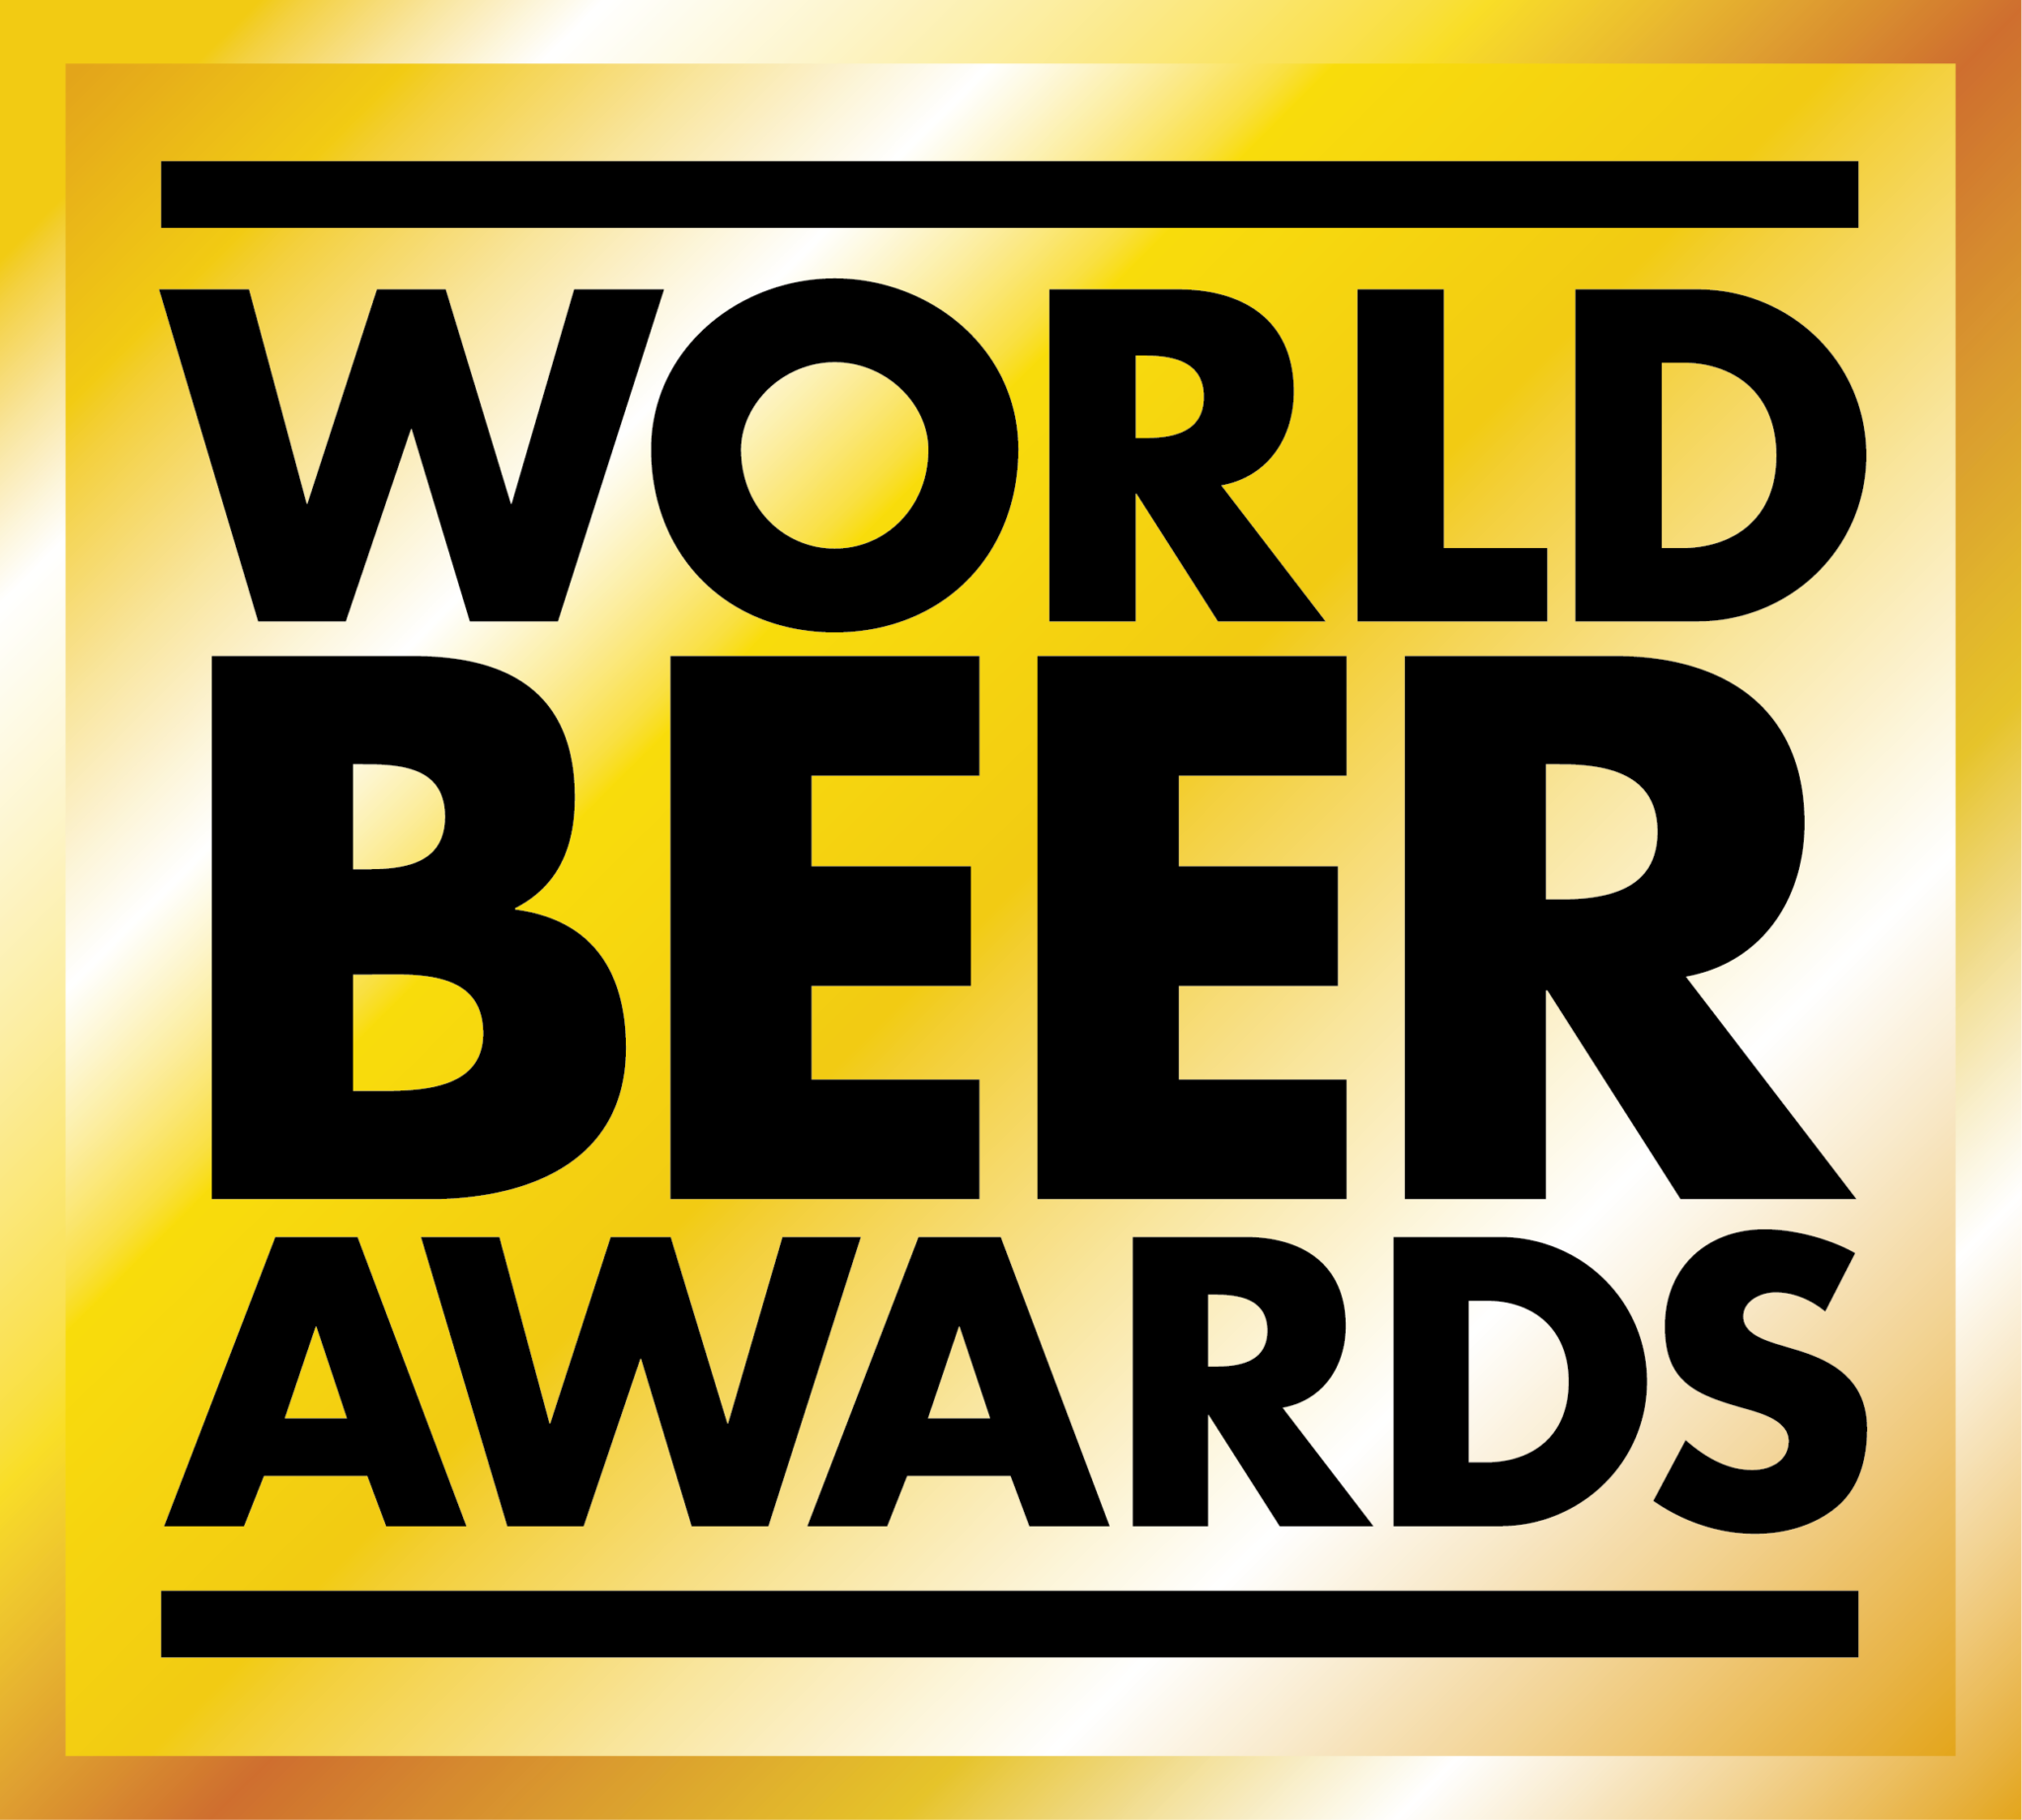 World Beer Awards The British Guild of Beer Writers